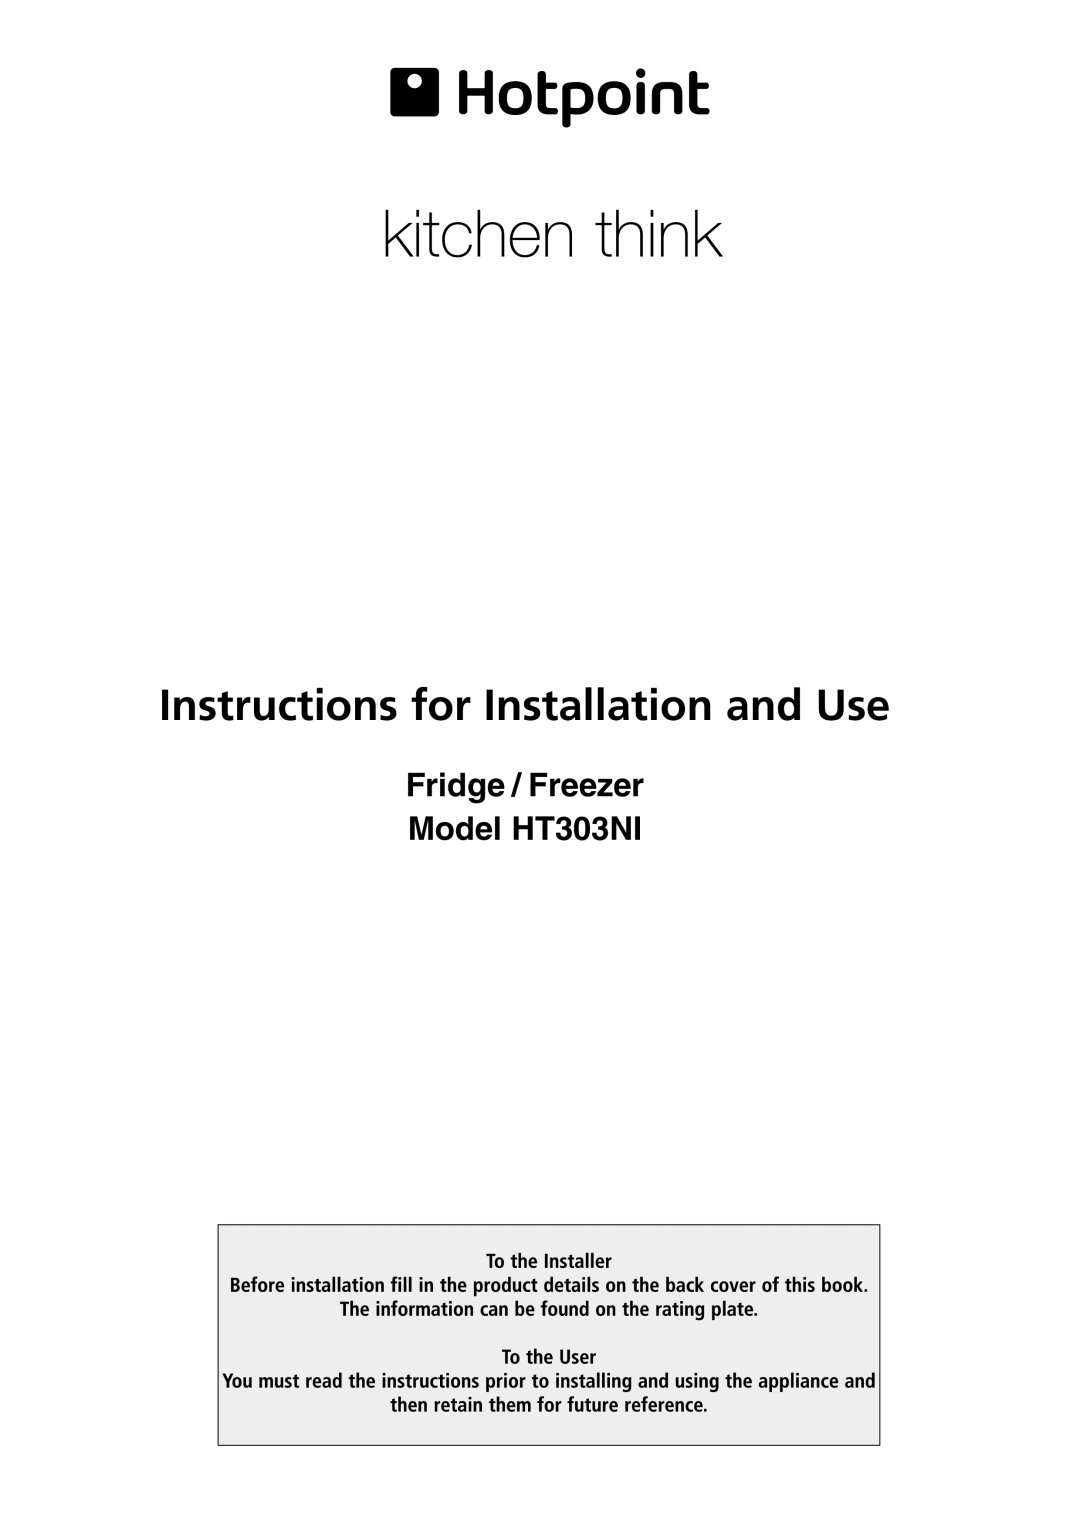 Hotpoint manual Fridge / Freezer Model HT303NI, Instructions for Installation and Use 